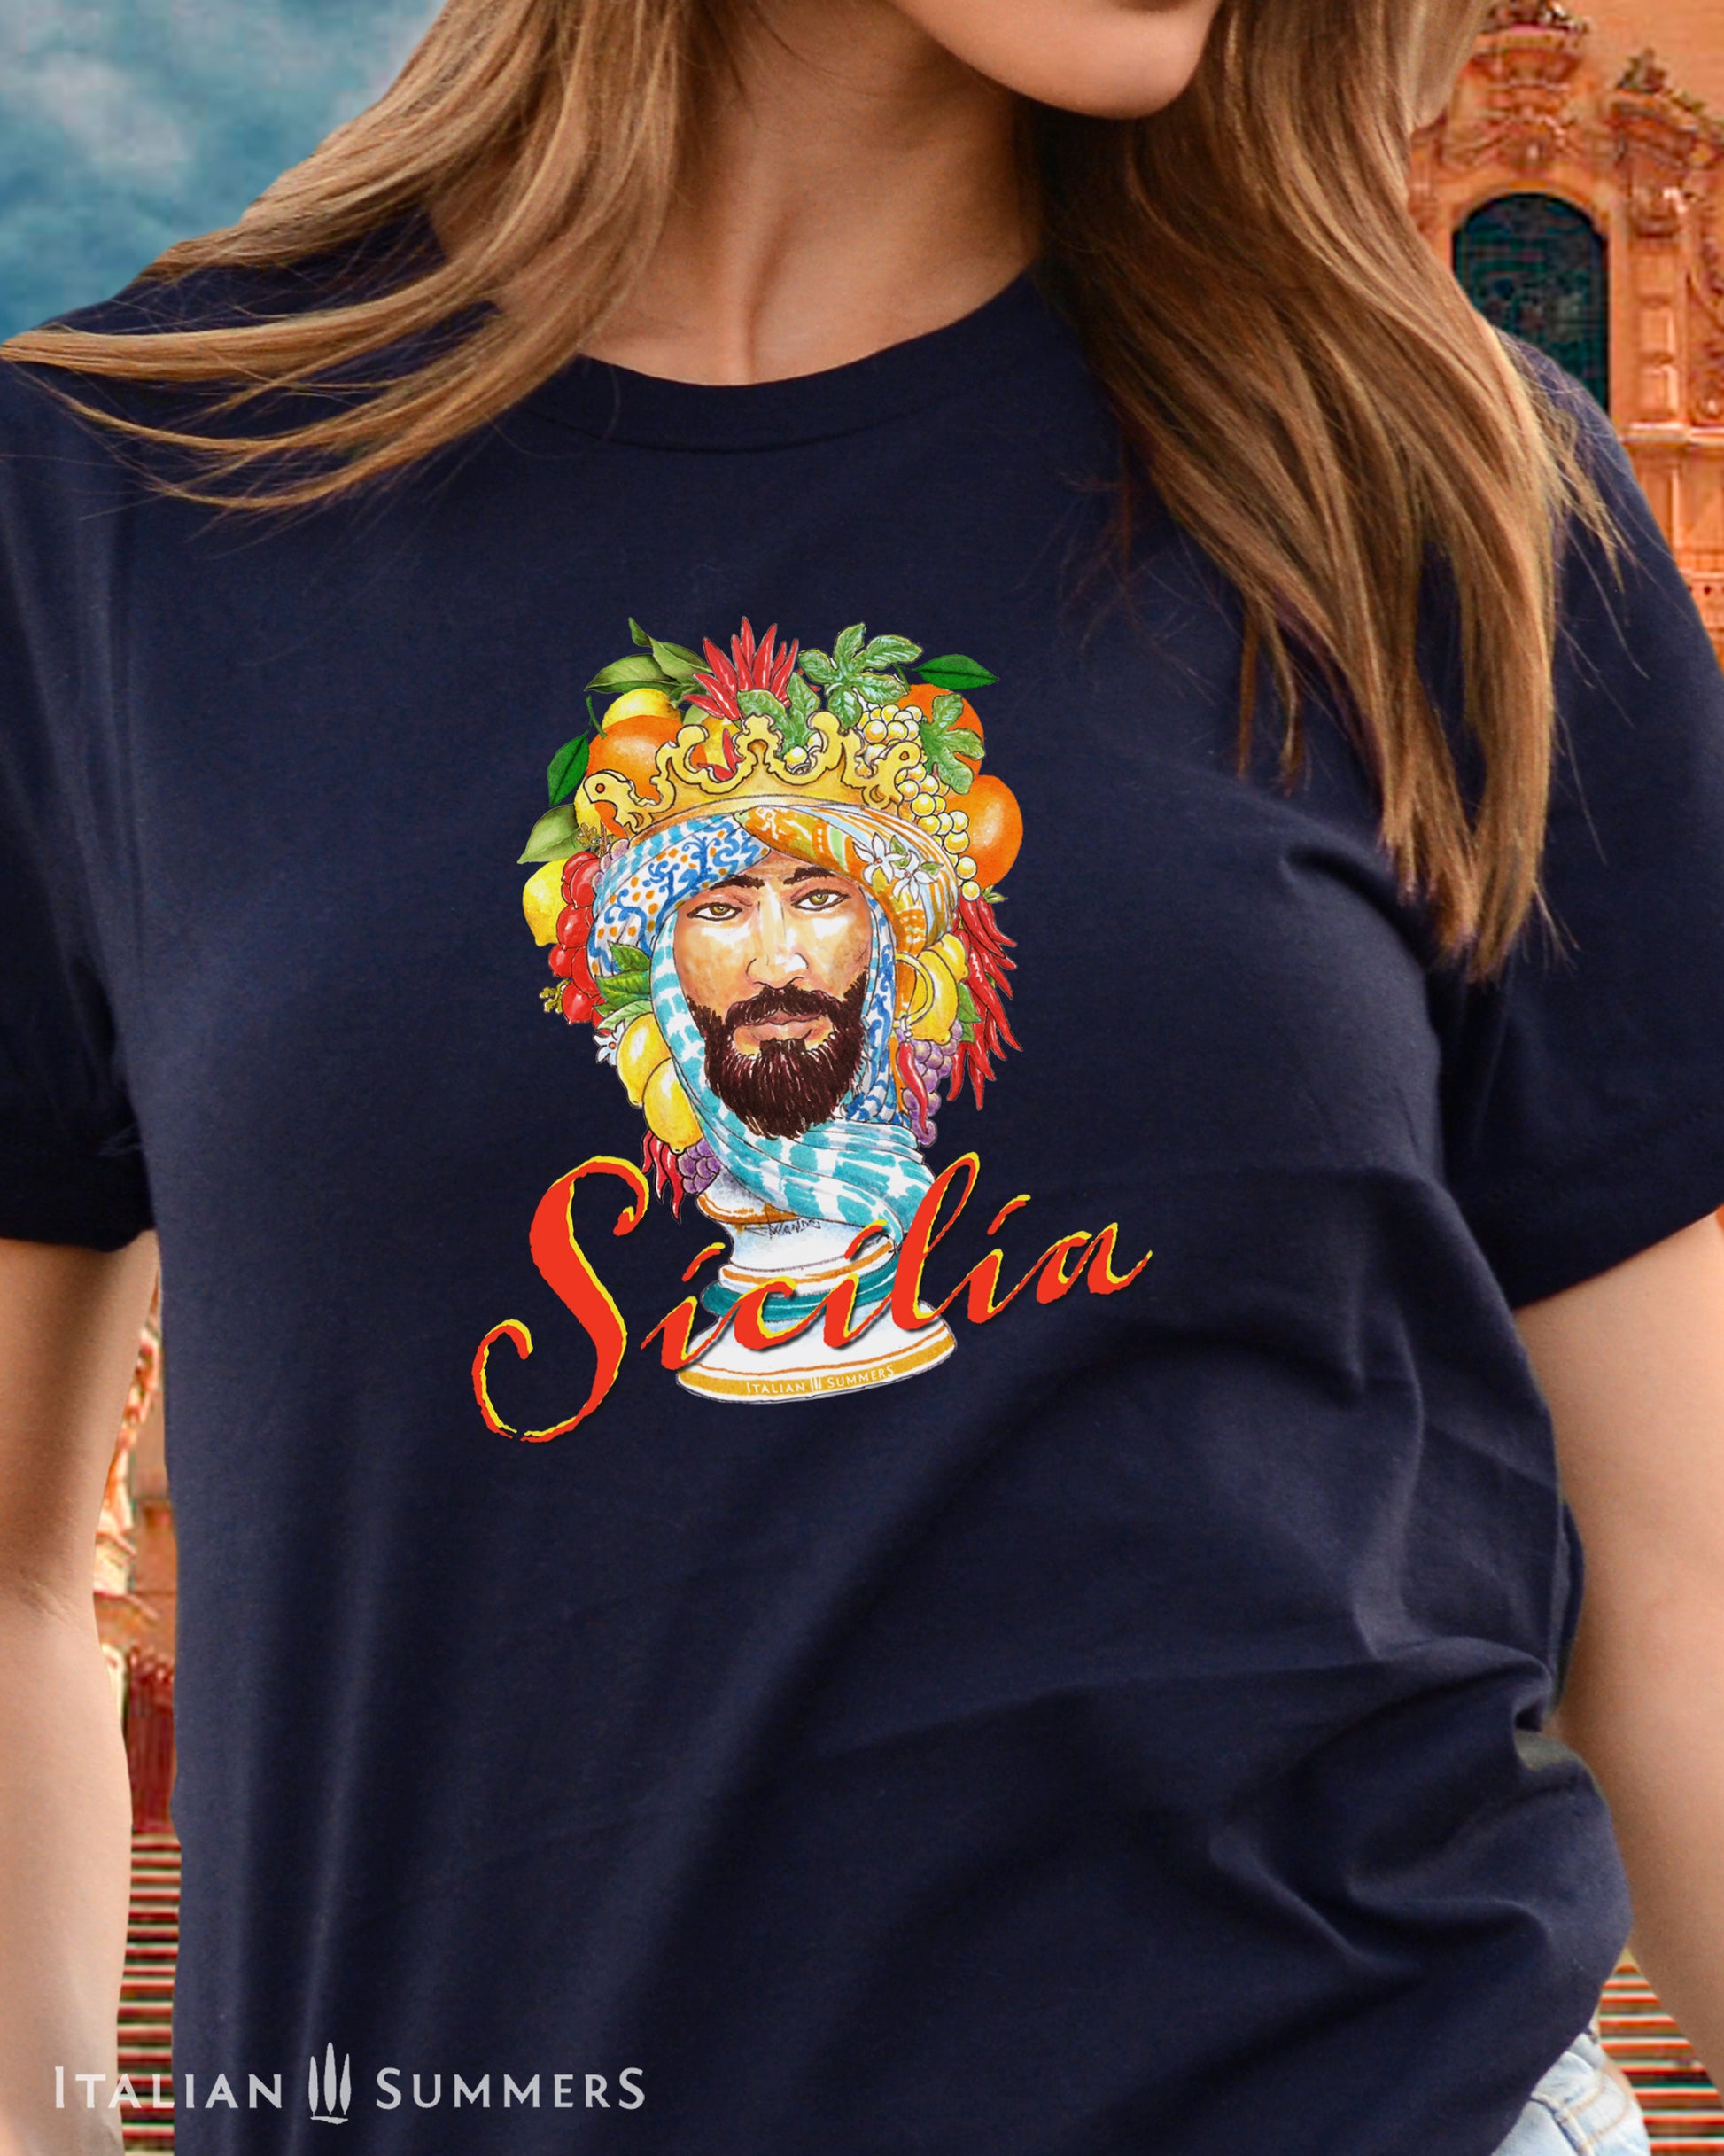 Italy inspired cotton unsex crew-neck T shirt with a hand-illustrated print of a decorative Moor's head from the Sicilian tradition of Caltagirone ceramic sculptures depicting the head of a Moorish nobleman with turban and decorative fruits.